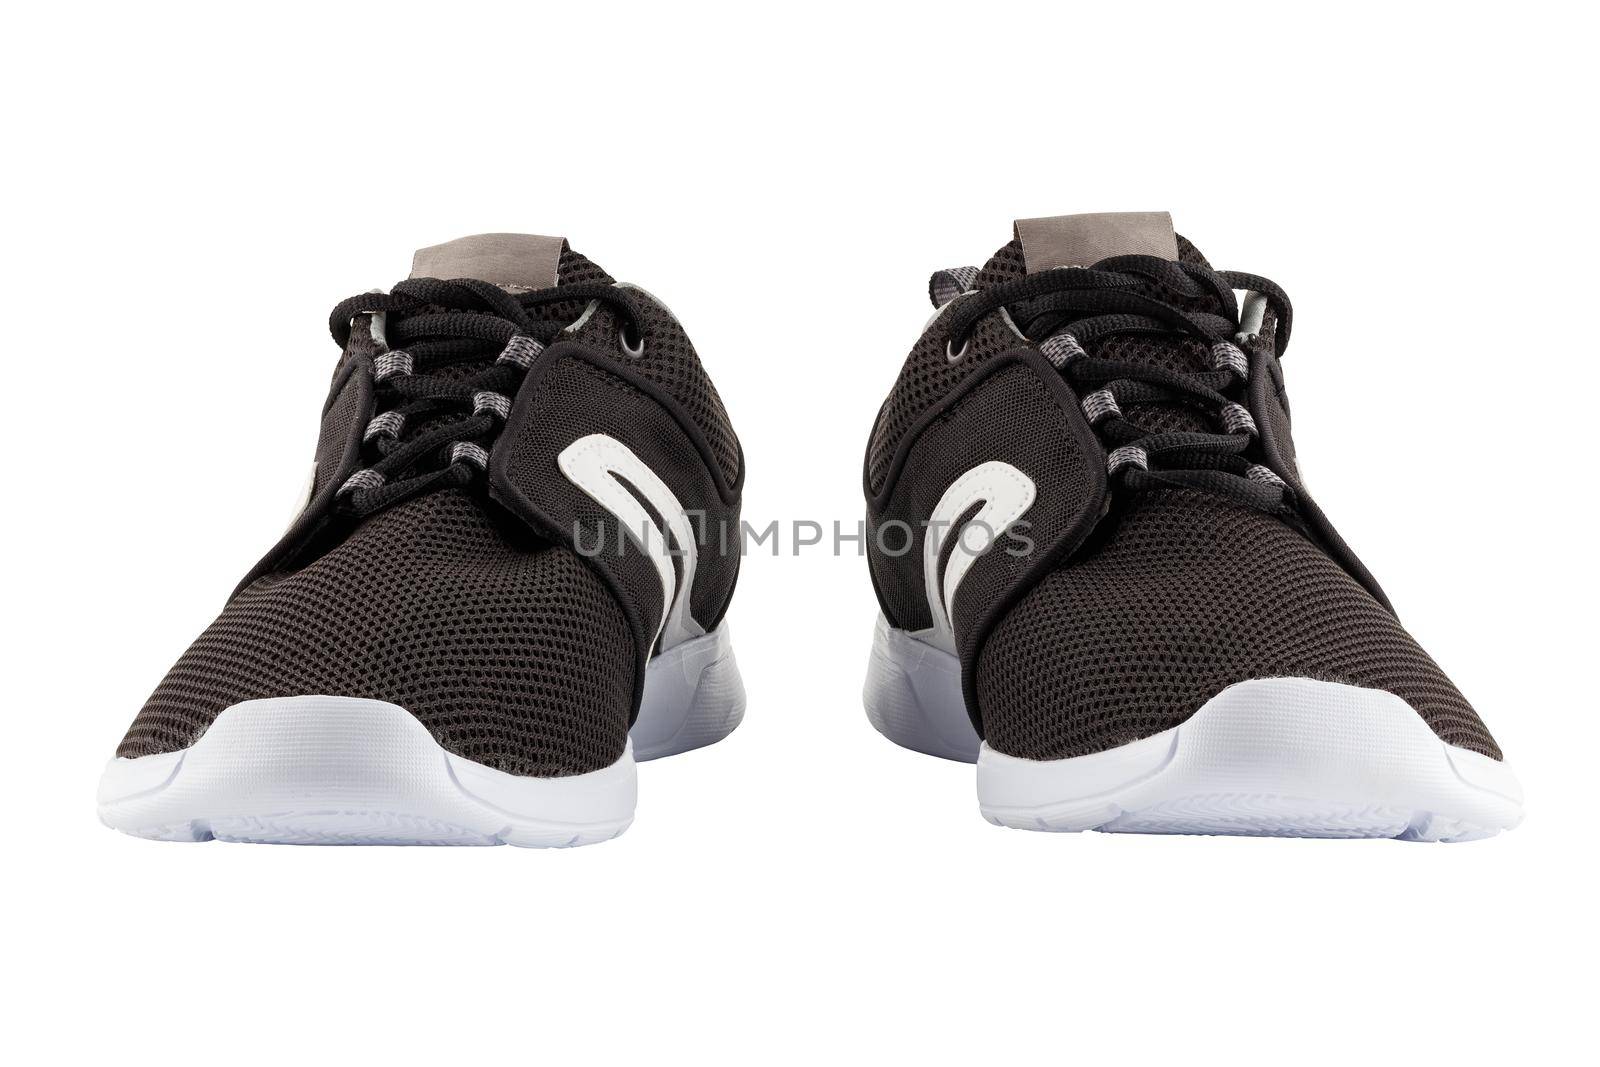 pair of black airmesh summer walking lightweight shoes isolated on white background, frontal view